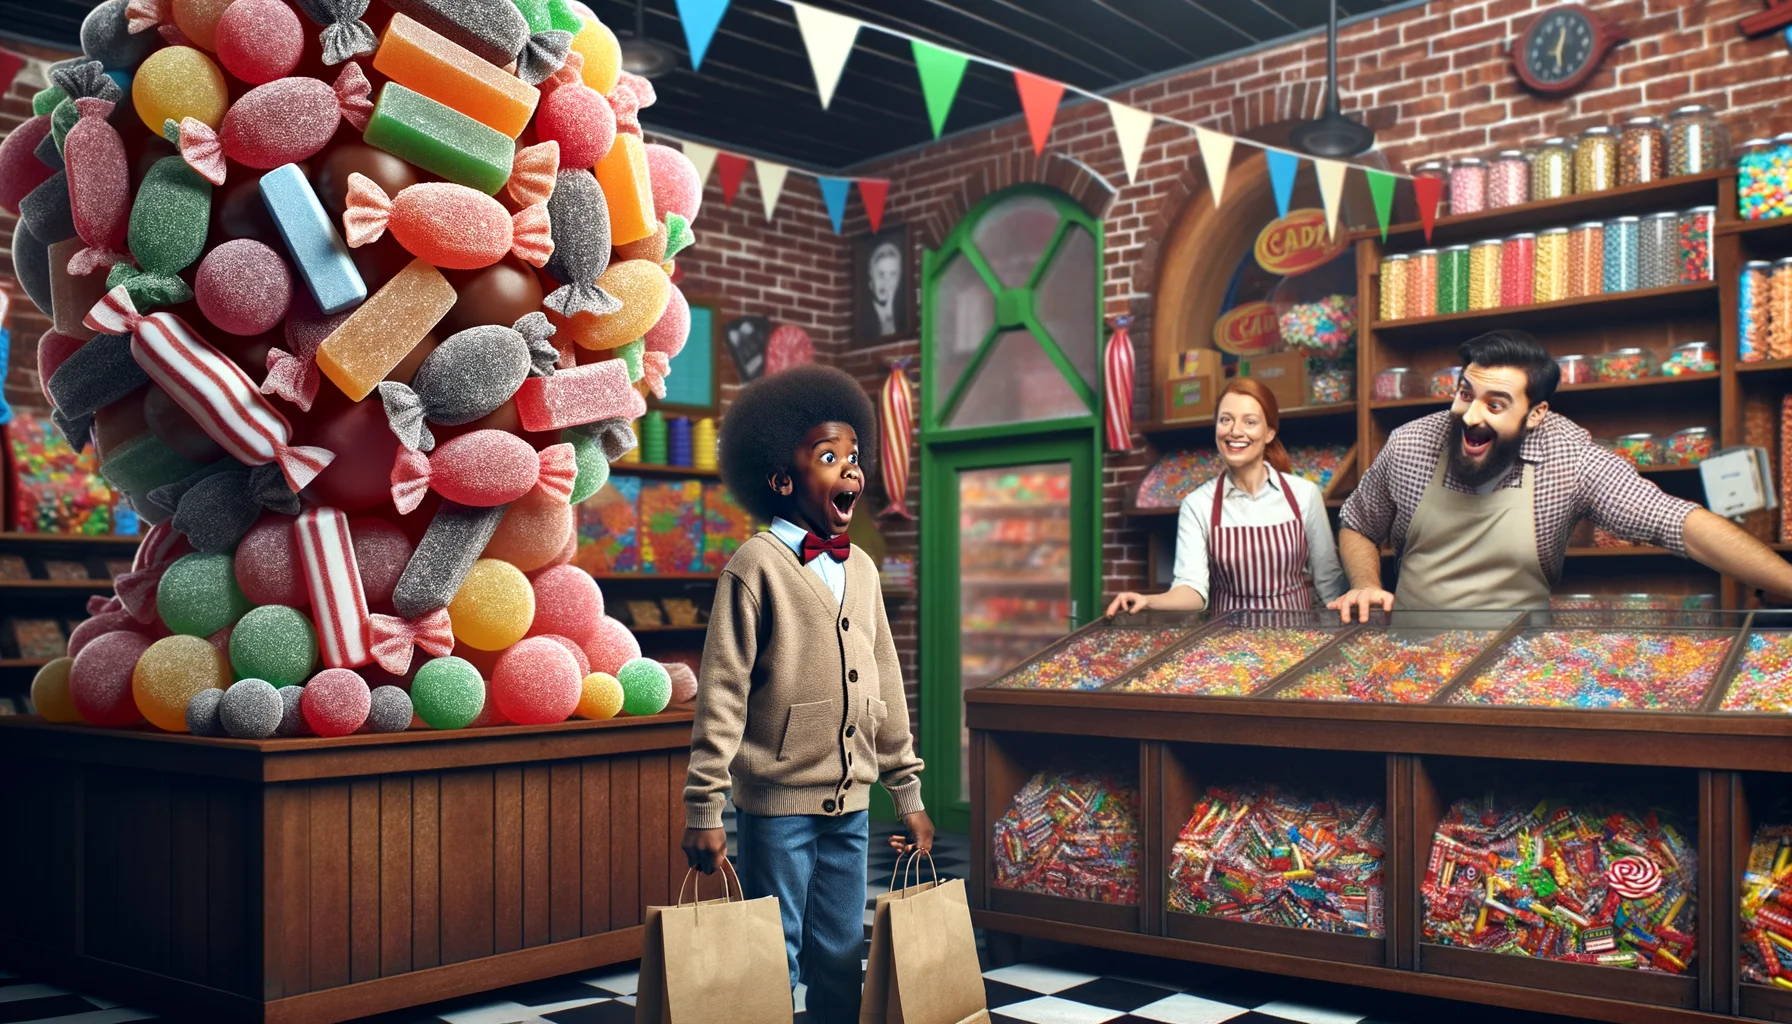 Create a humorous image of a perfect scenario involving 'Hard Candy'. Visualize a vibrant candy shop with shelves stacked with an assortment of hard candies of all sizes, shapes and colors. In the center of the shop stands a giant, extremely detailed, realistic hard candy sculpture, much to the surprise of an African-American child who just walked in. He's holding a candy paper bag in one hand, eyes wide and mouth open in awe, looking at the sculpture. The shop owners, a Caucasian female and a Hispanic male, are chuckling behind their counter, enjoying the astonished reaction.